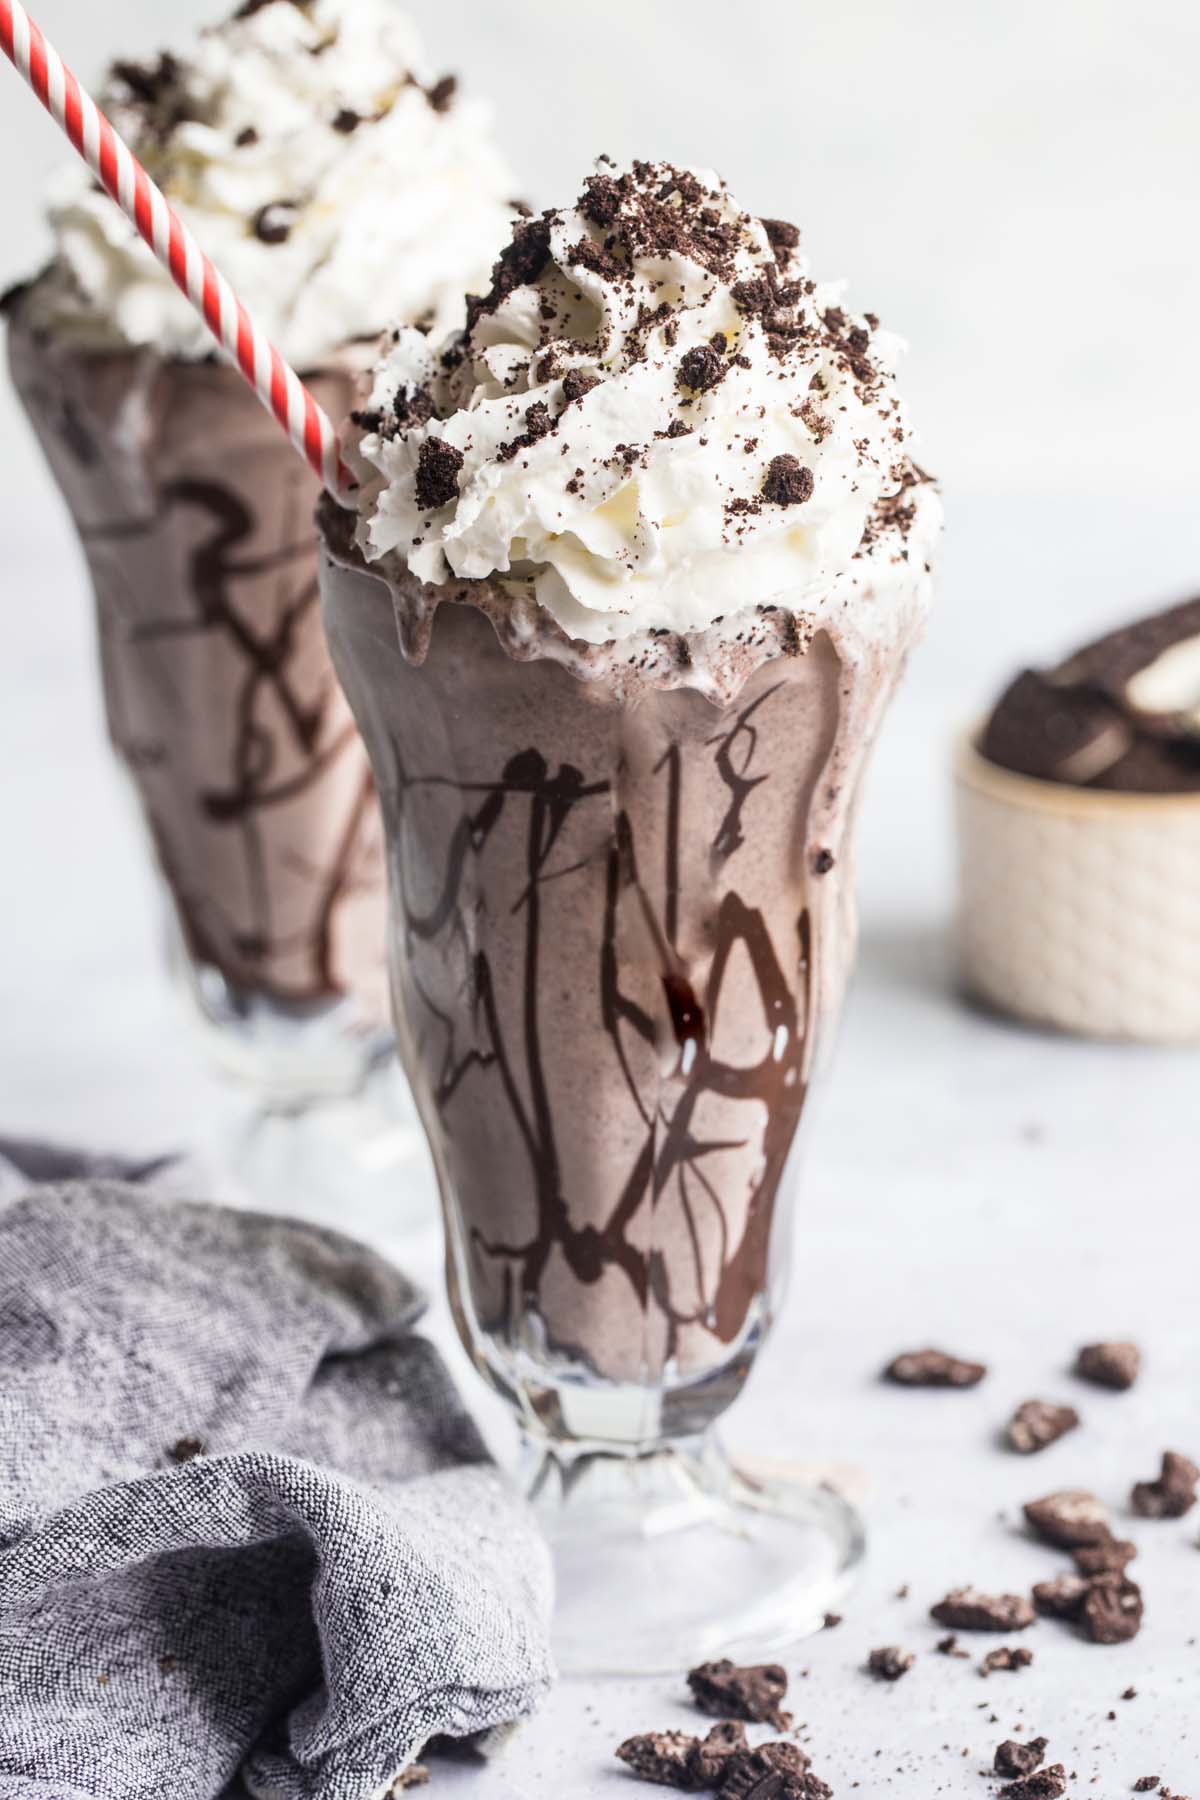 Oreo cookie milkshake with whipped cream and a red and white straw.